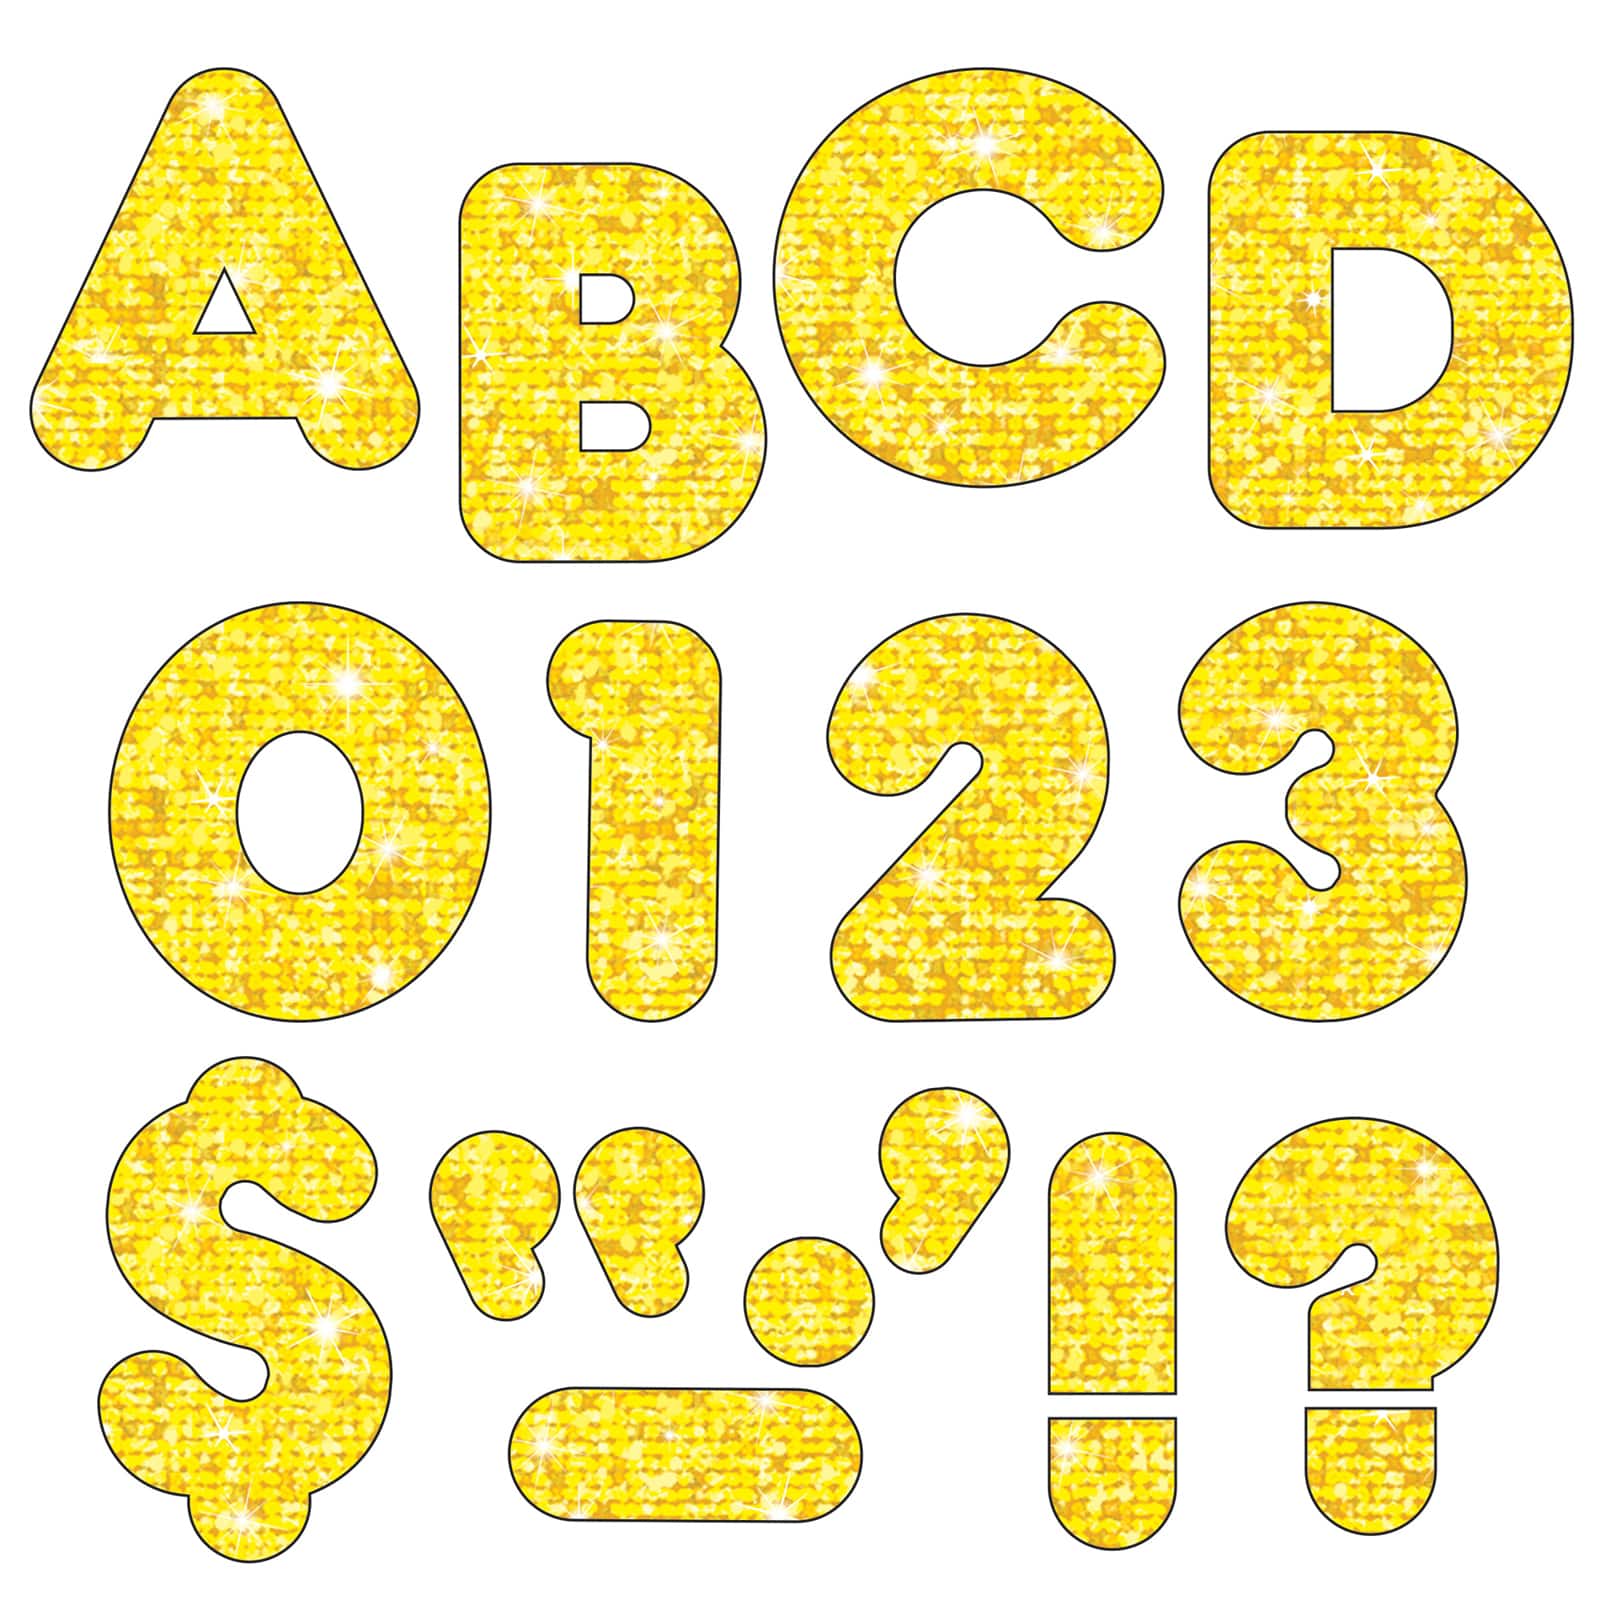 Carson Dellosa 152-Piece 3 Colorful Bulletin Board Letters for Classroom,  Alphabet Letters, Numbers, Punctuation & Symbols, Cutout Letters for  Bulletin Board, White Board and Colorful Classroom Decor